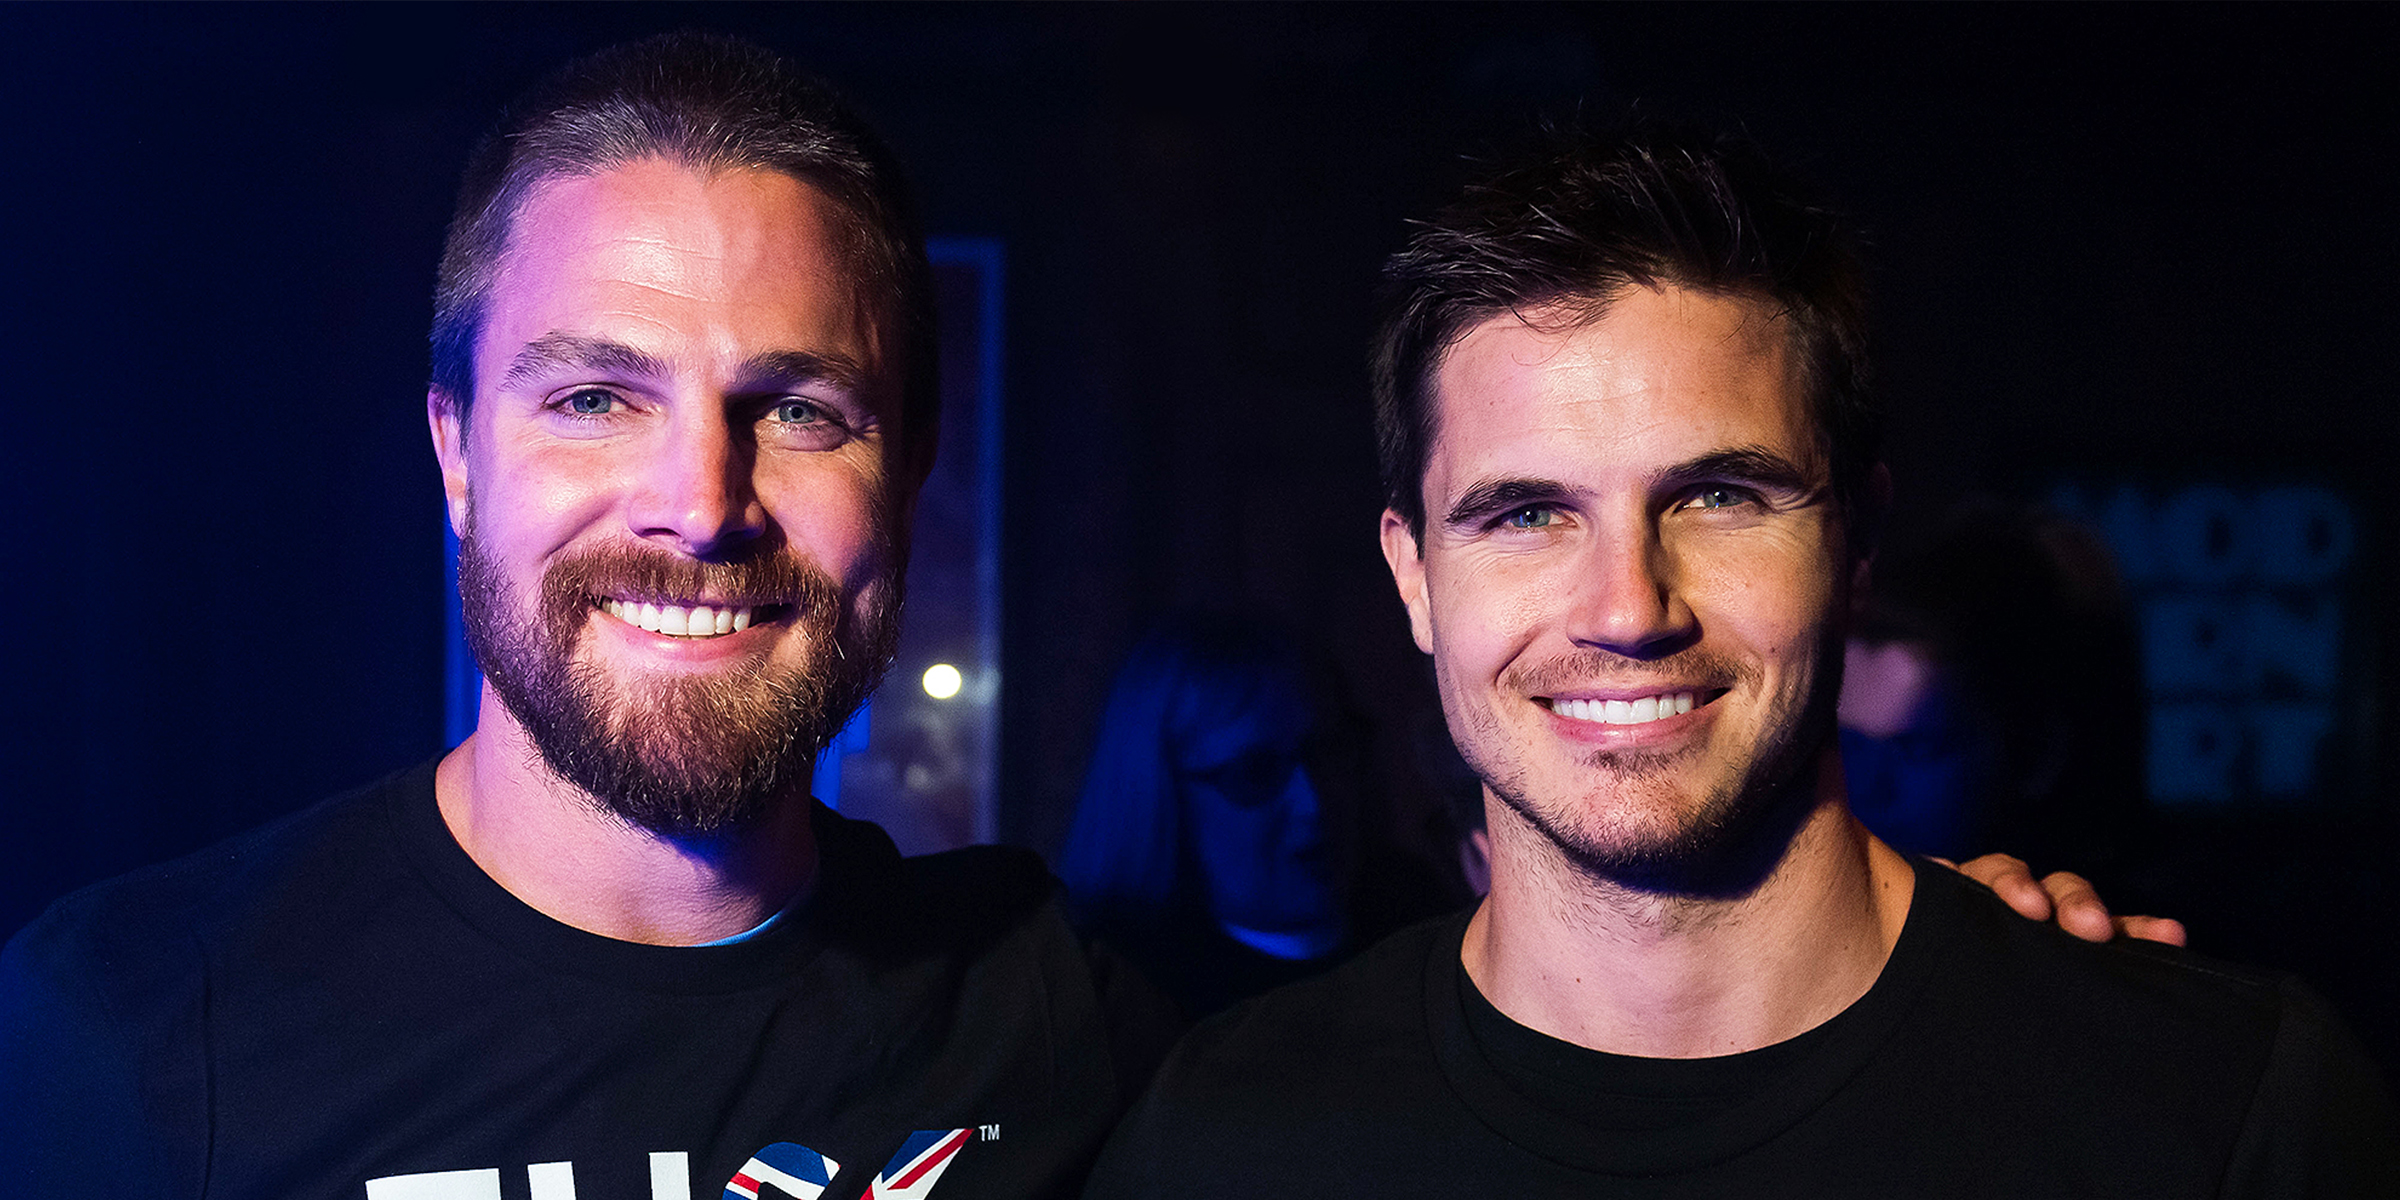 Stephen Amell and Robbie Amell | Source: Getty Images